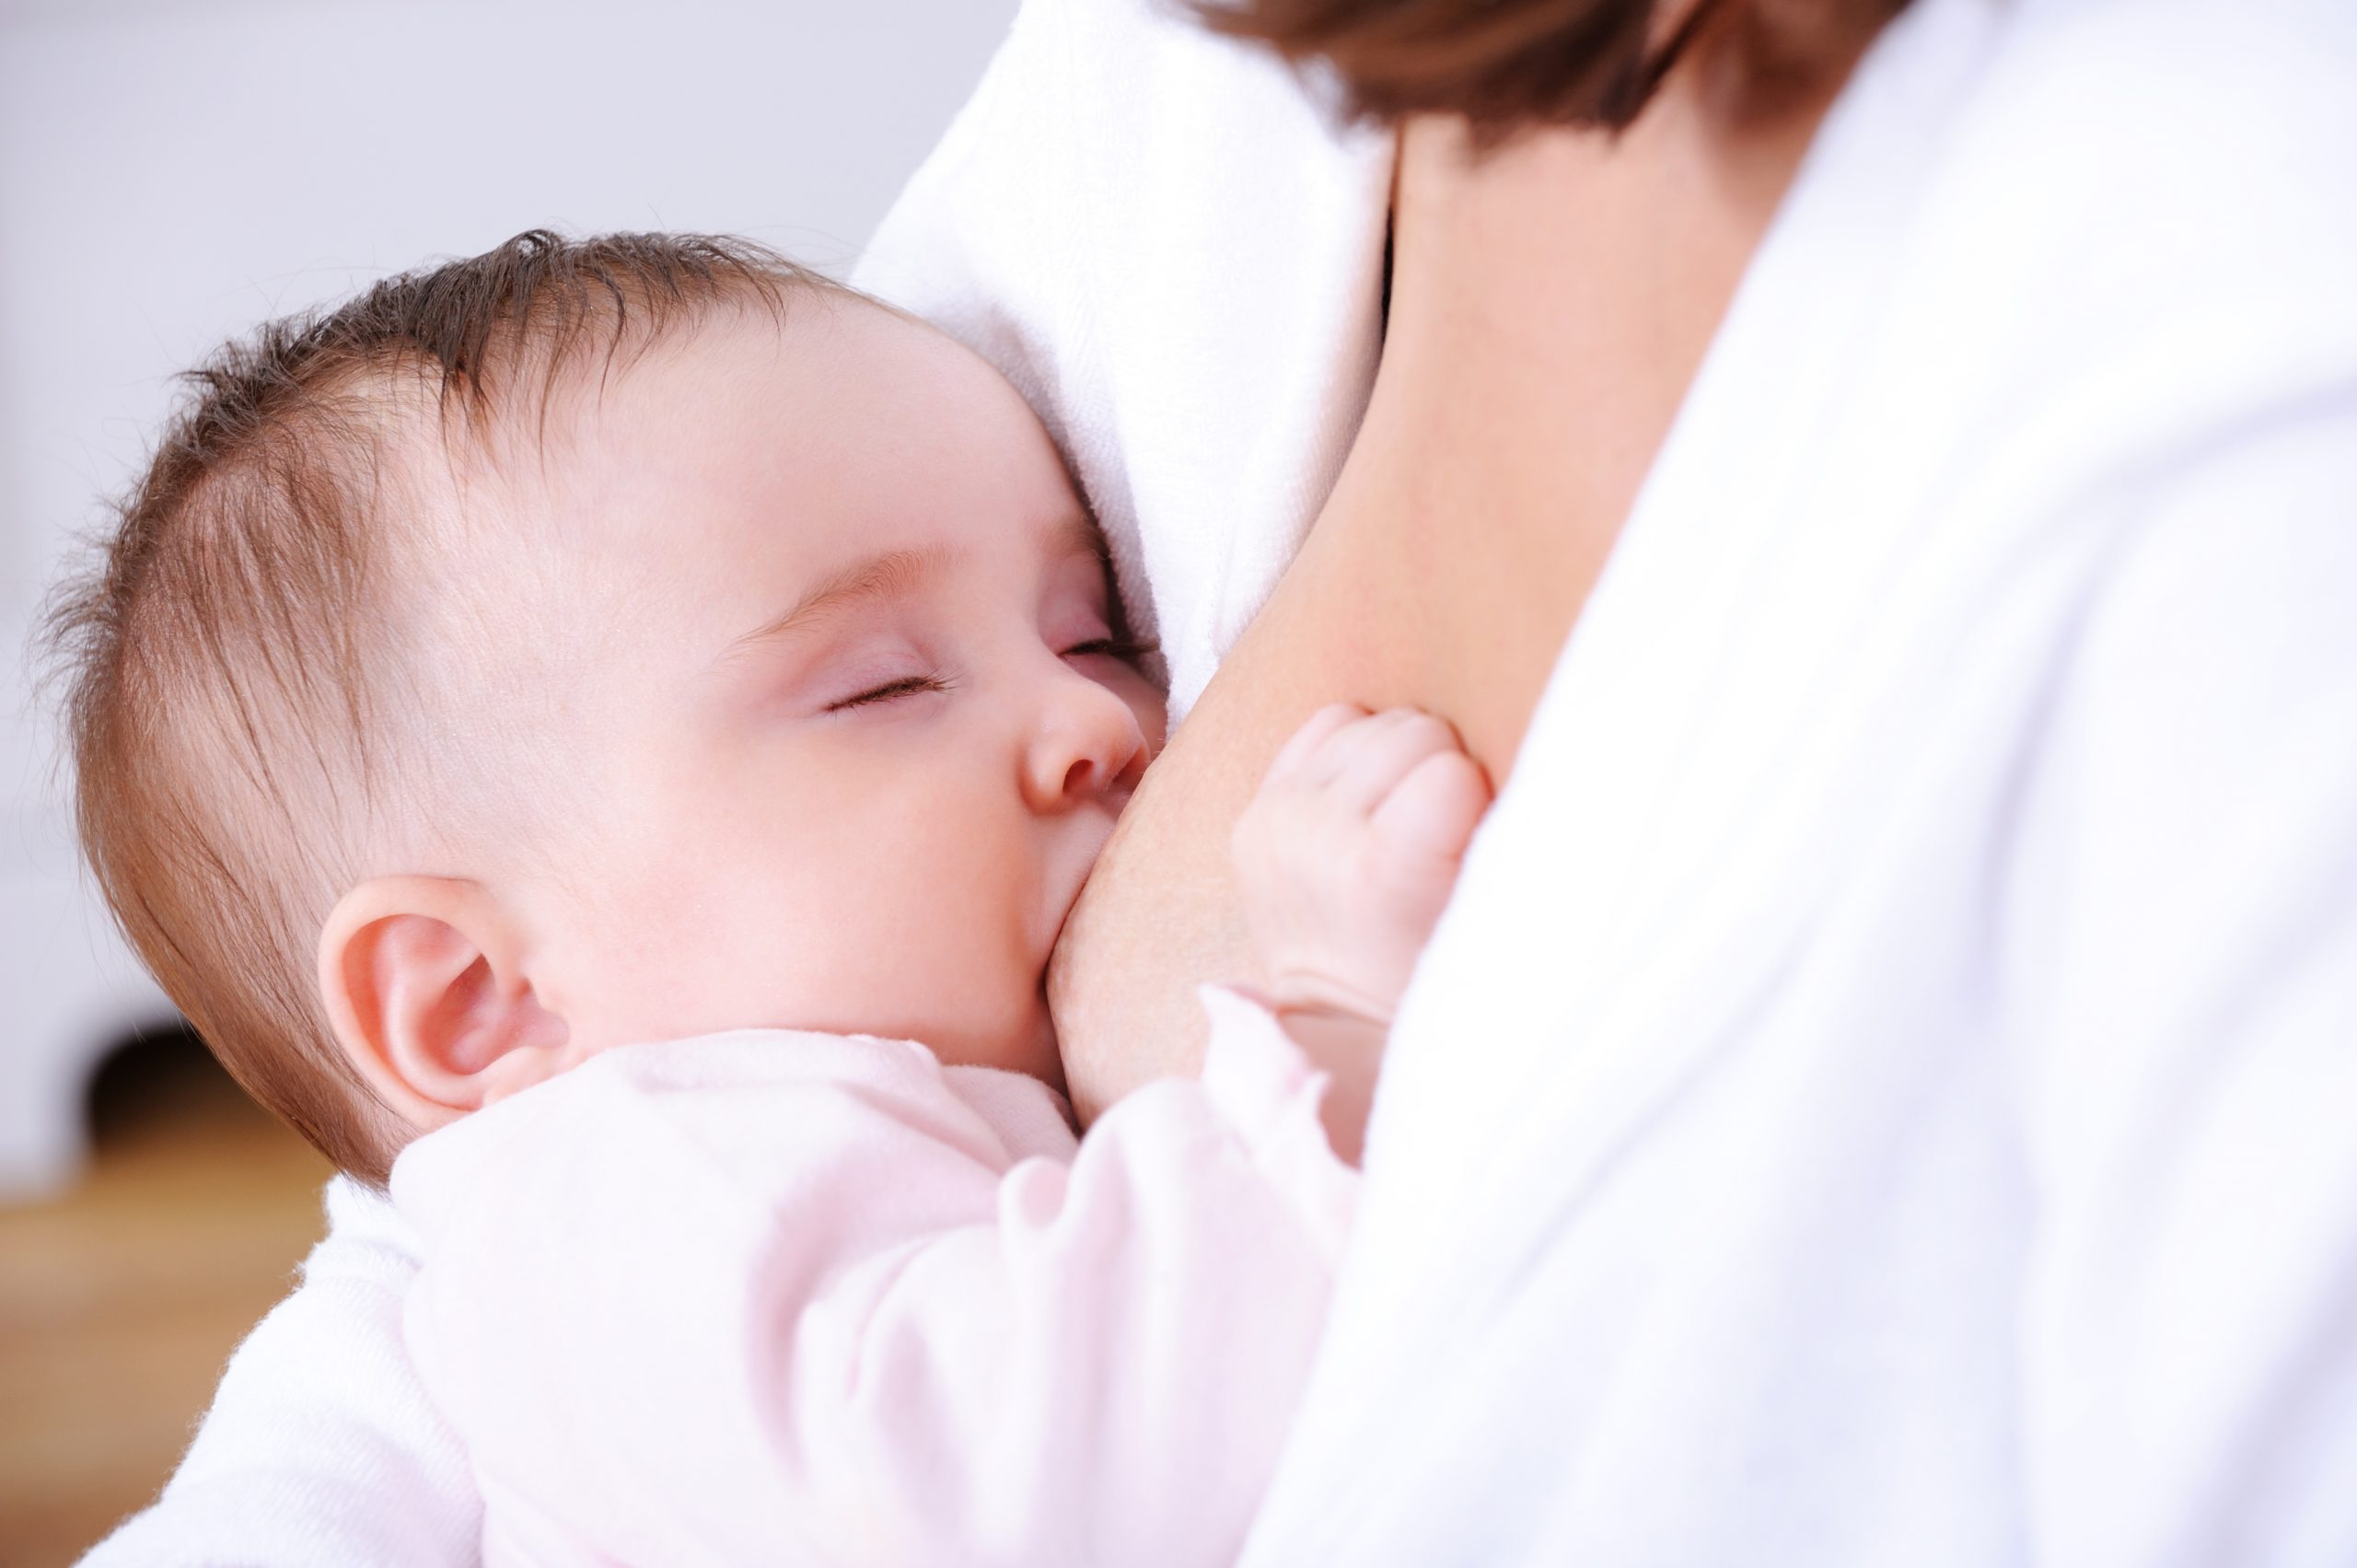 Breastfeeding for little beautiful newborn baby with closed eyes - indoors